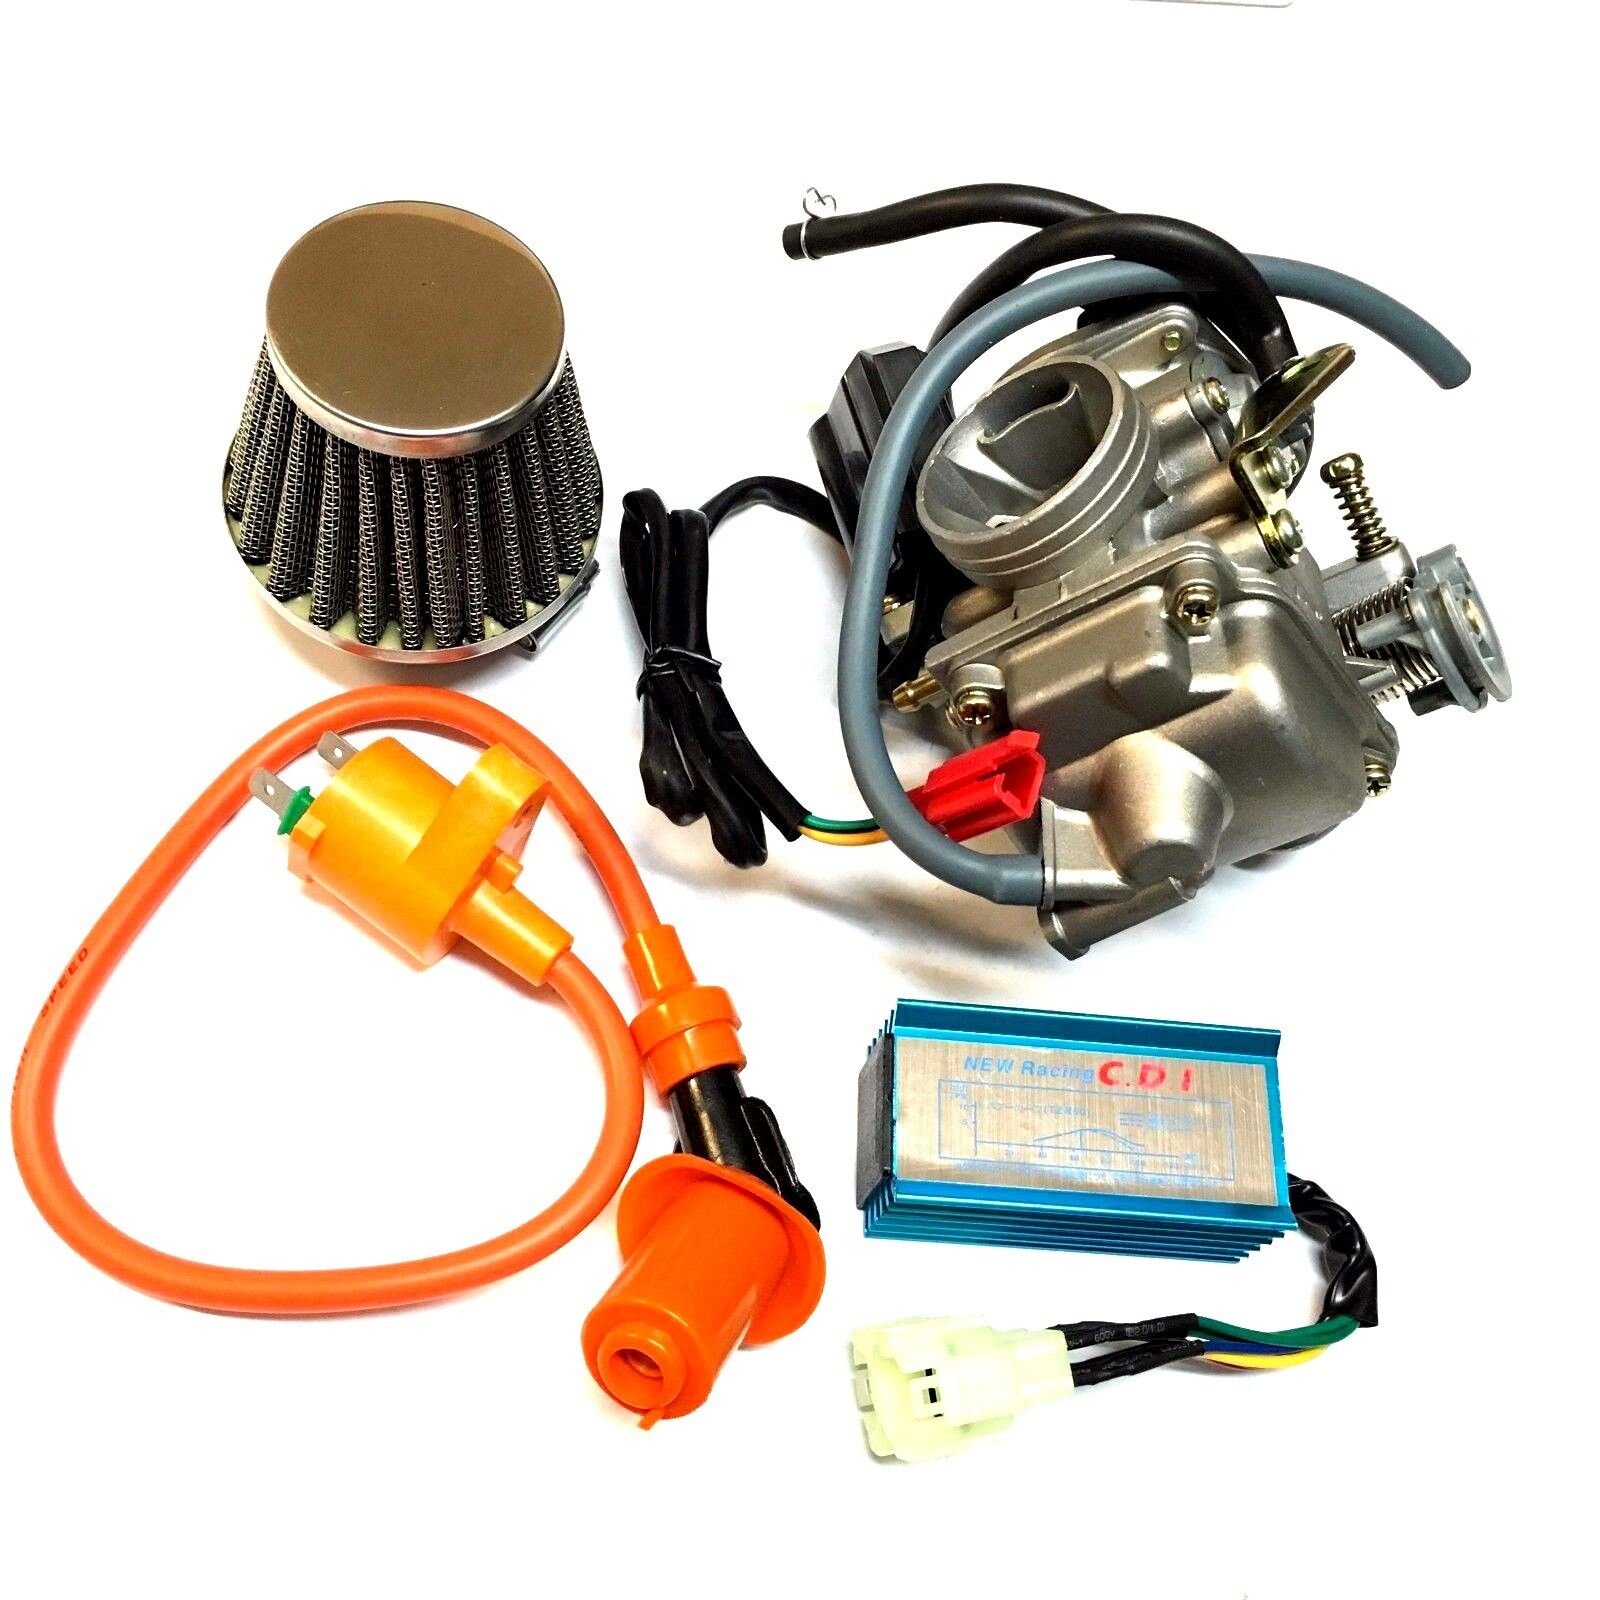 PERFORMANCE NEW 24MM GY6 150CC CARBURETOR RACE CDI COIL AIR FILTER CARB 